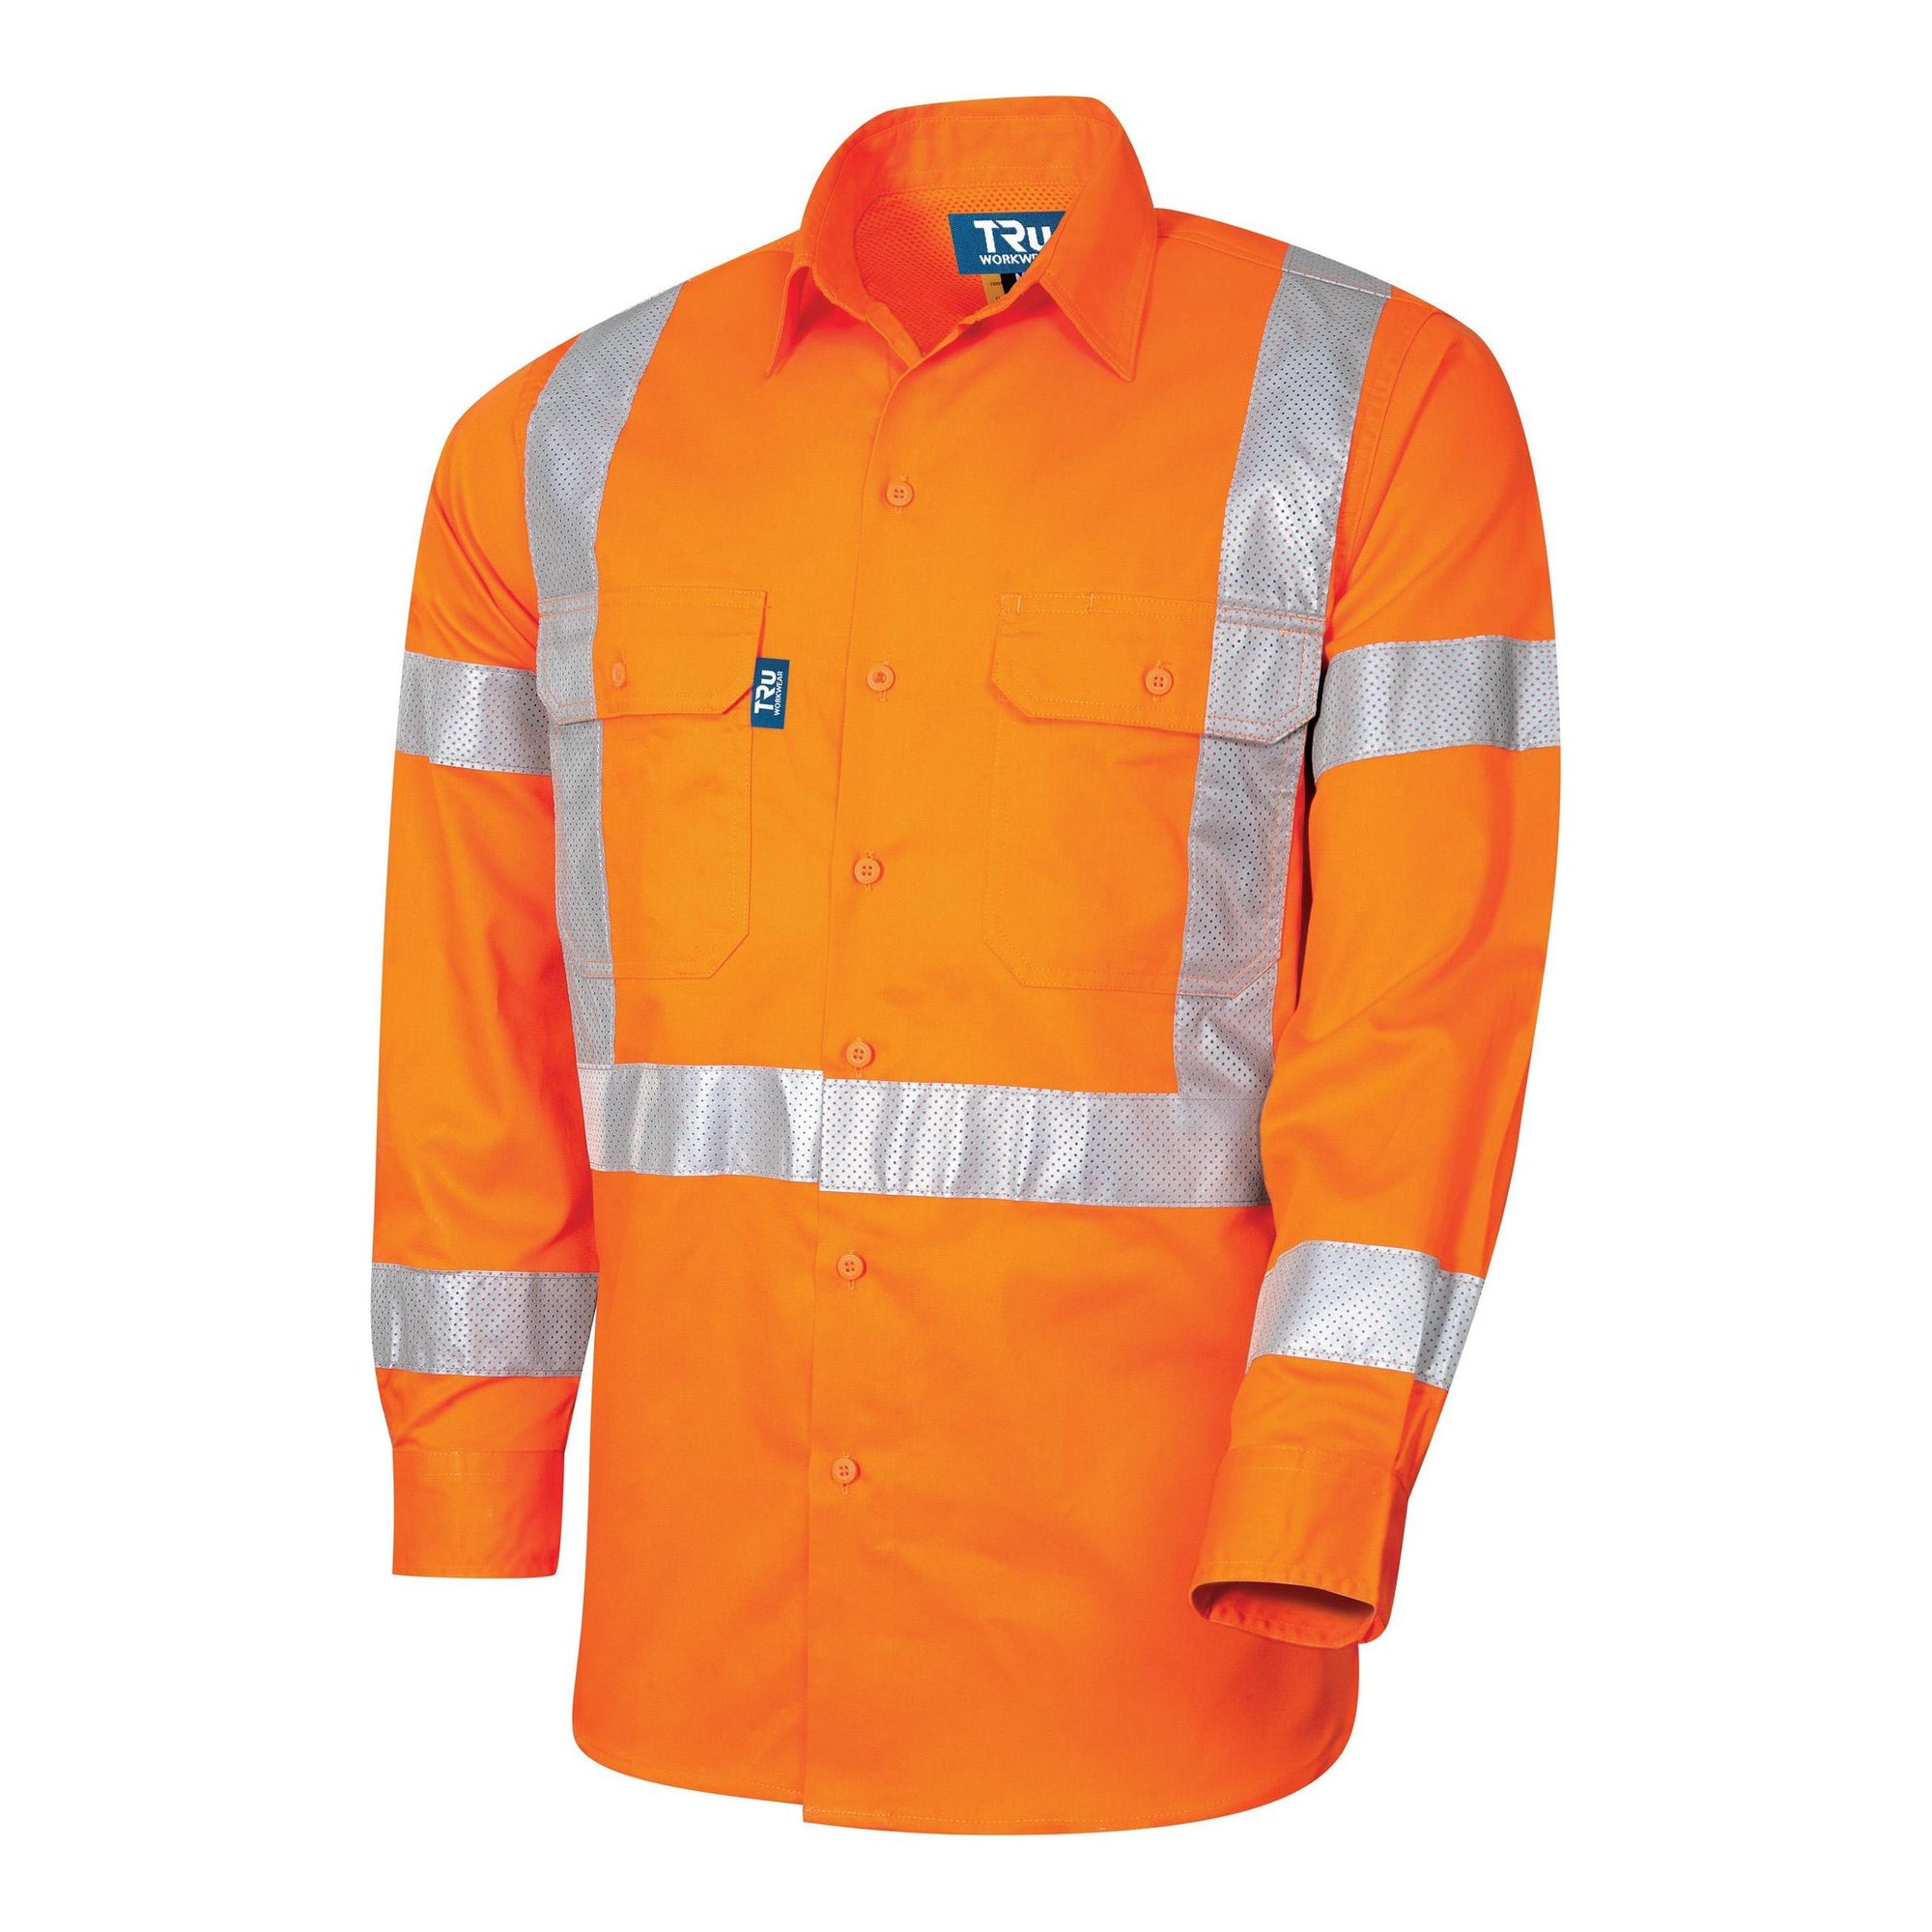 Tru Workwear NSW Rail Plus Series Lightweight Cotton Shirt with Perforated Tape - DS1166T5